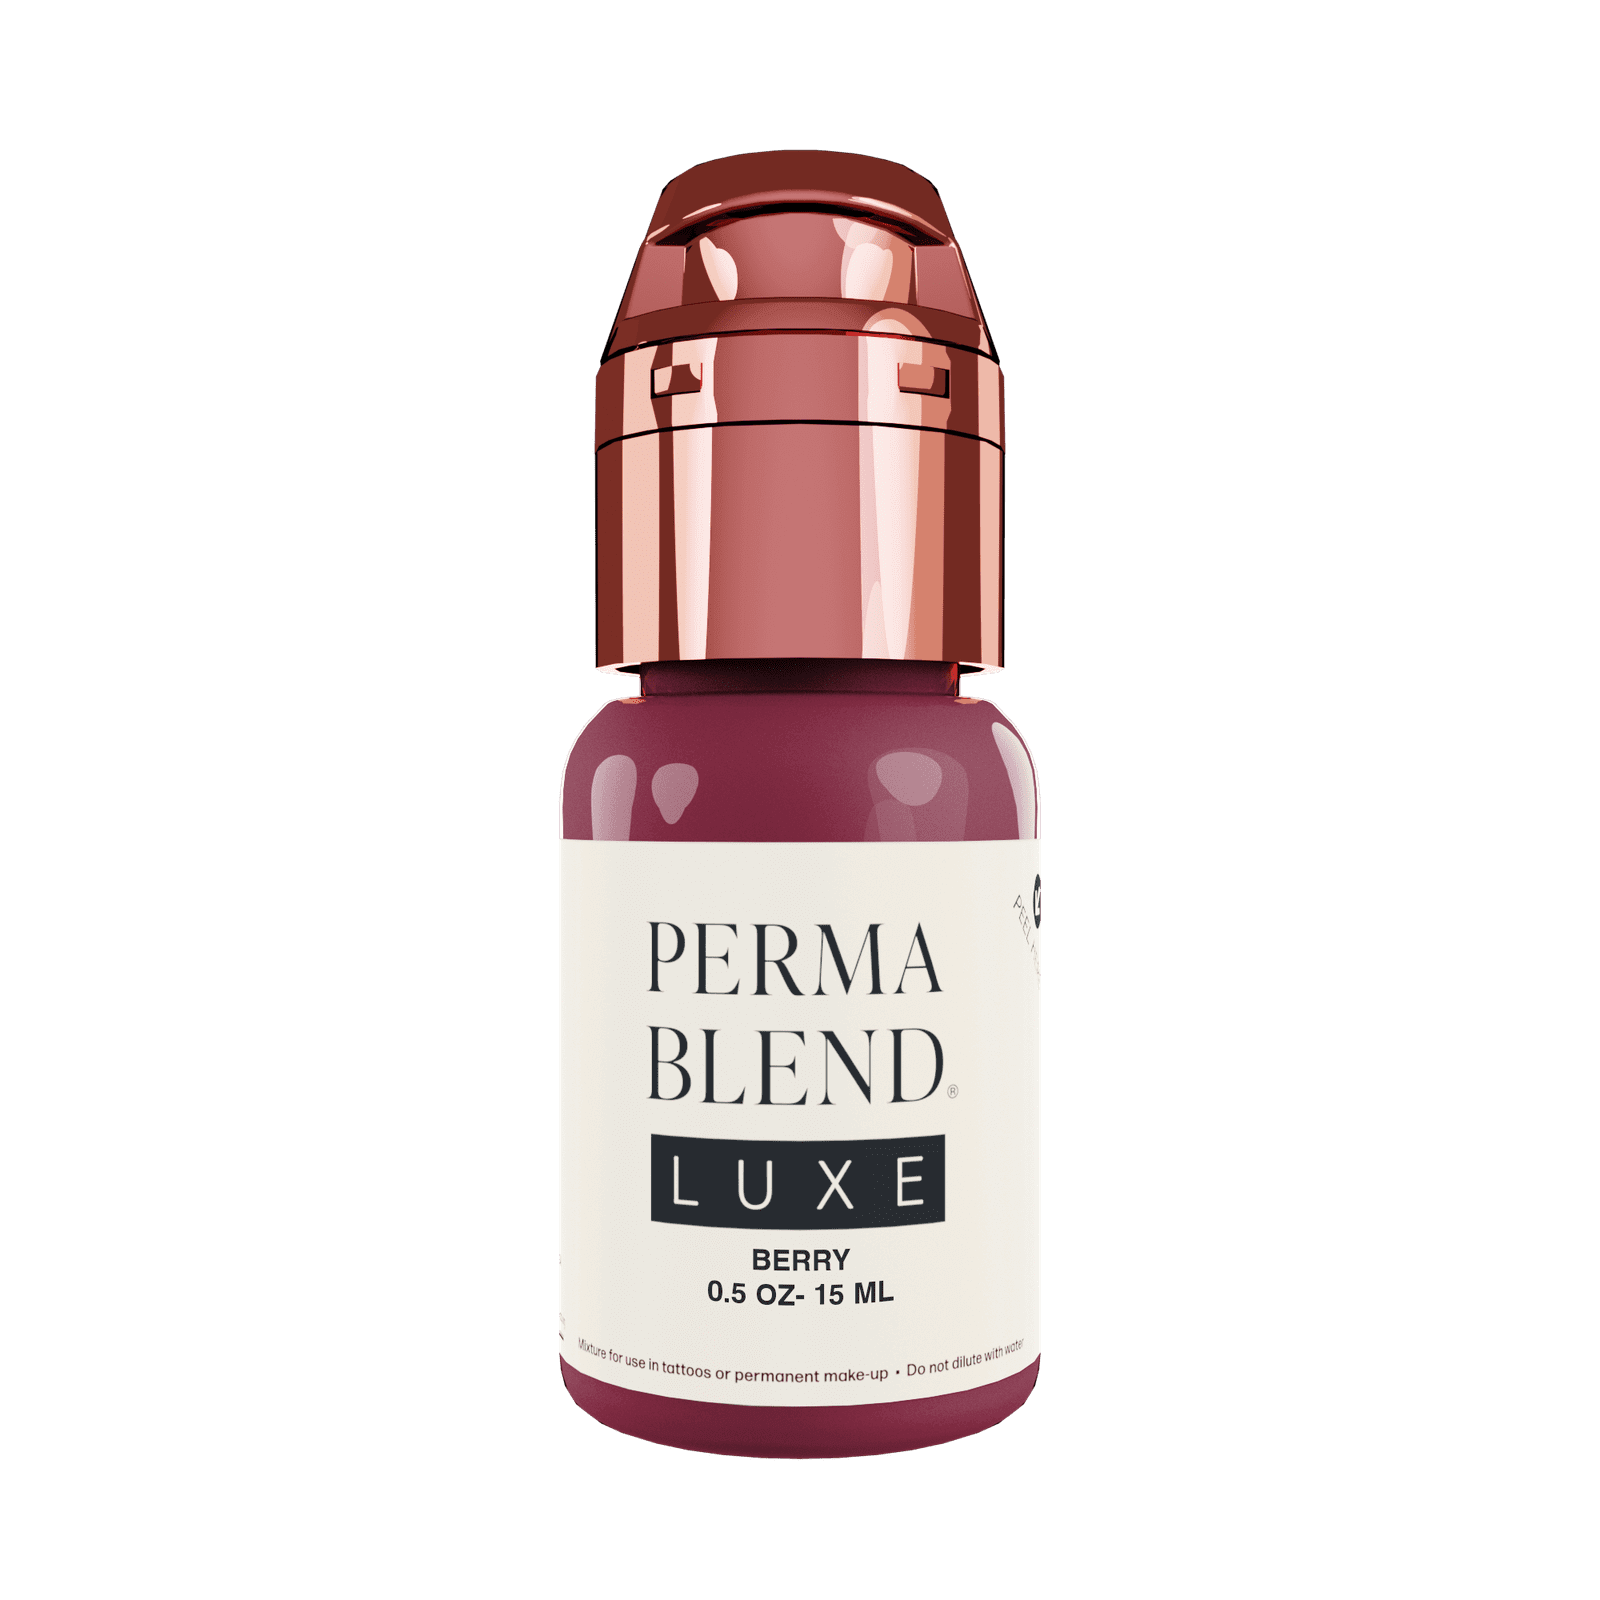 Perma Blend Luxe Berry